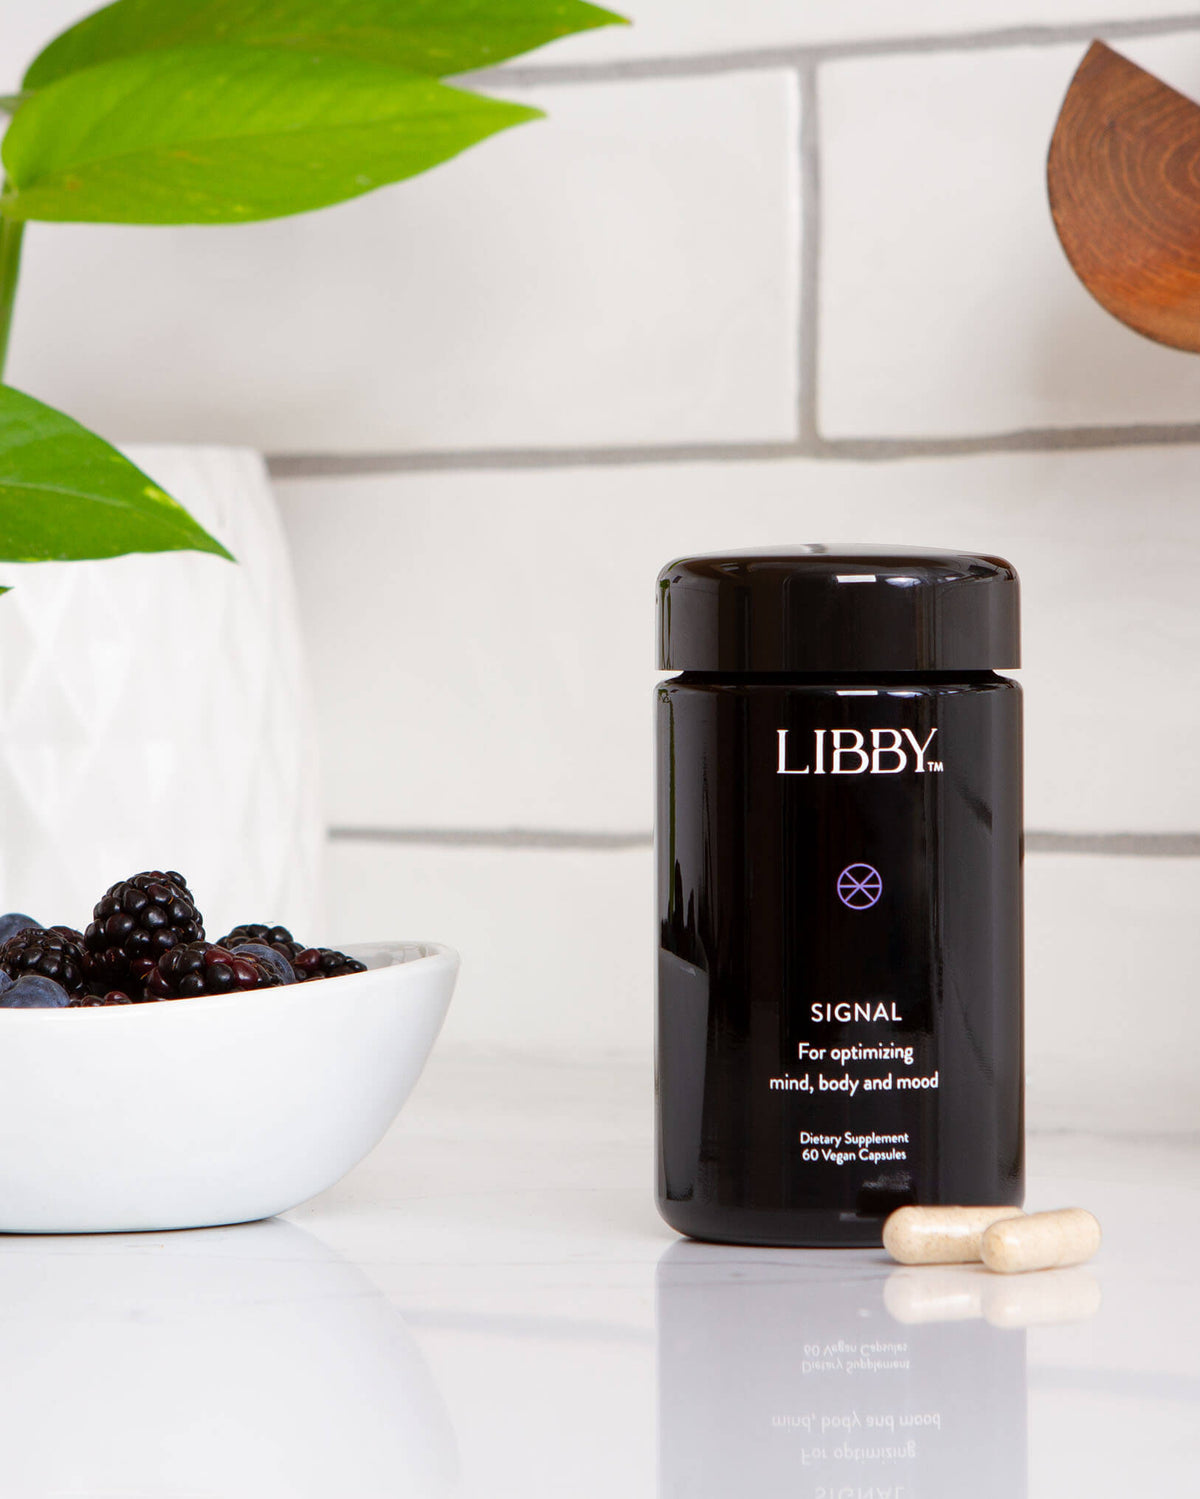 Signal supplement from Libby in a premium black bottle in a kitchen setting.